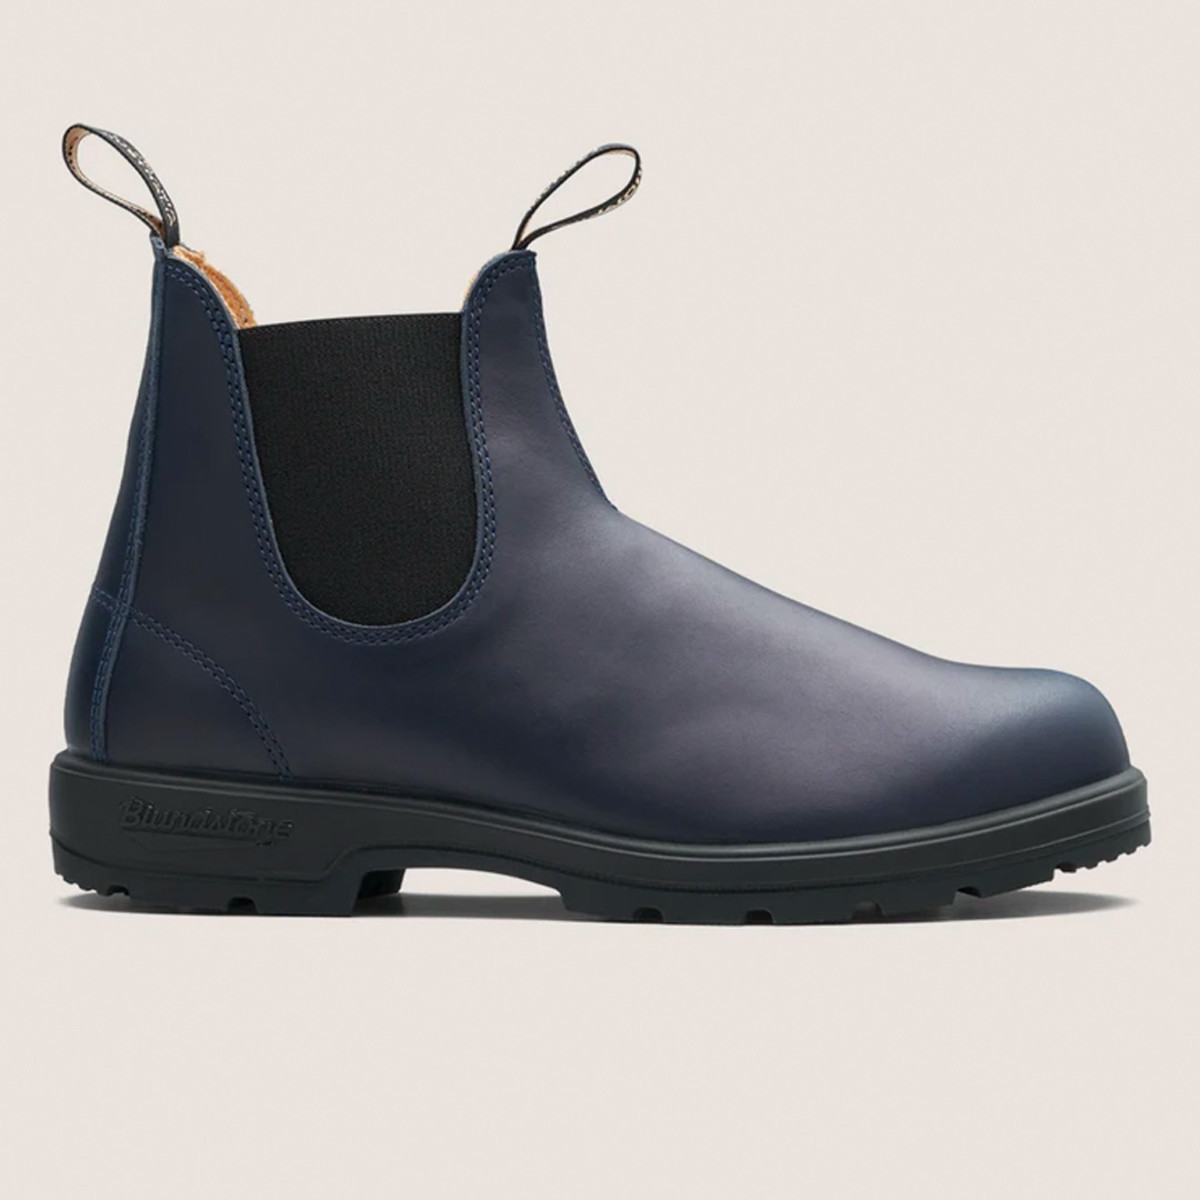 Blundstone Boots Clearance Sale, Limited Time Sale & Special